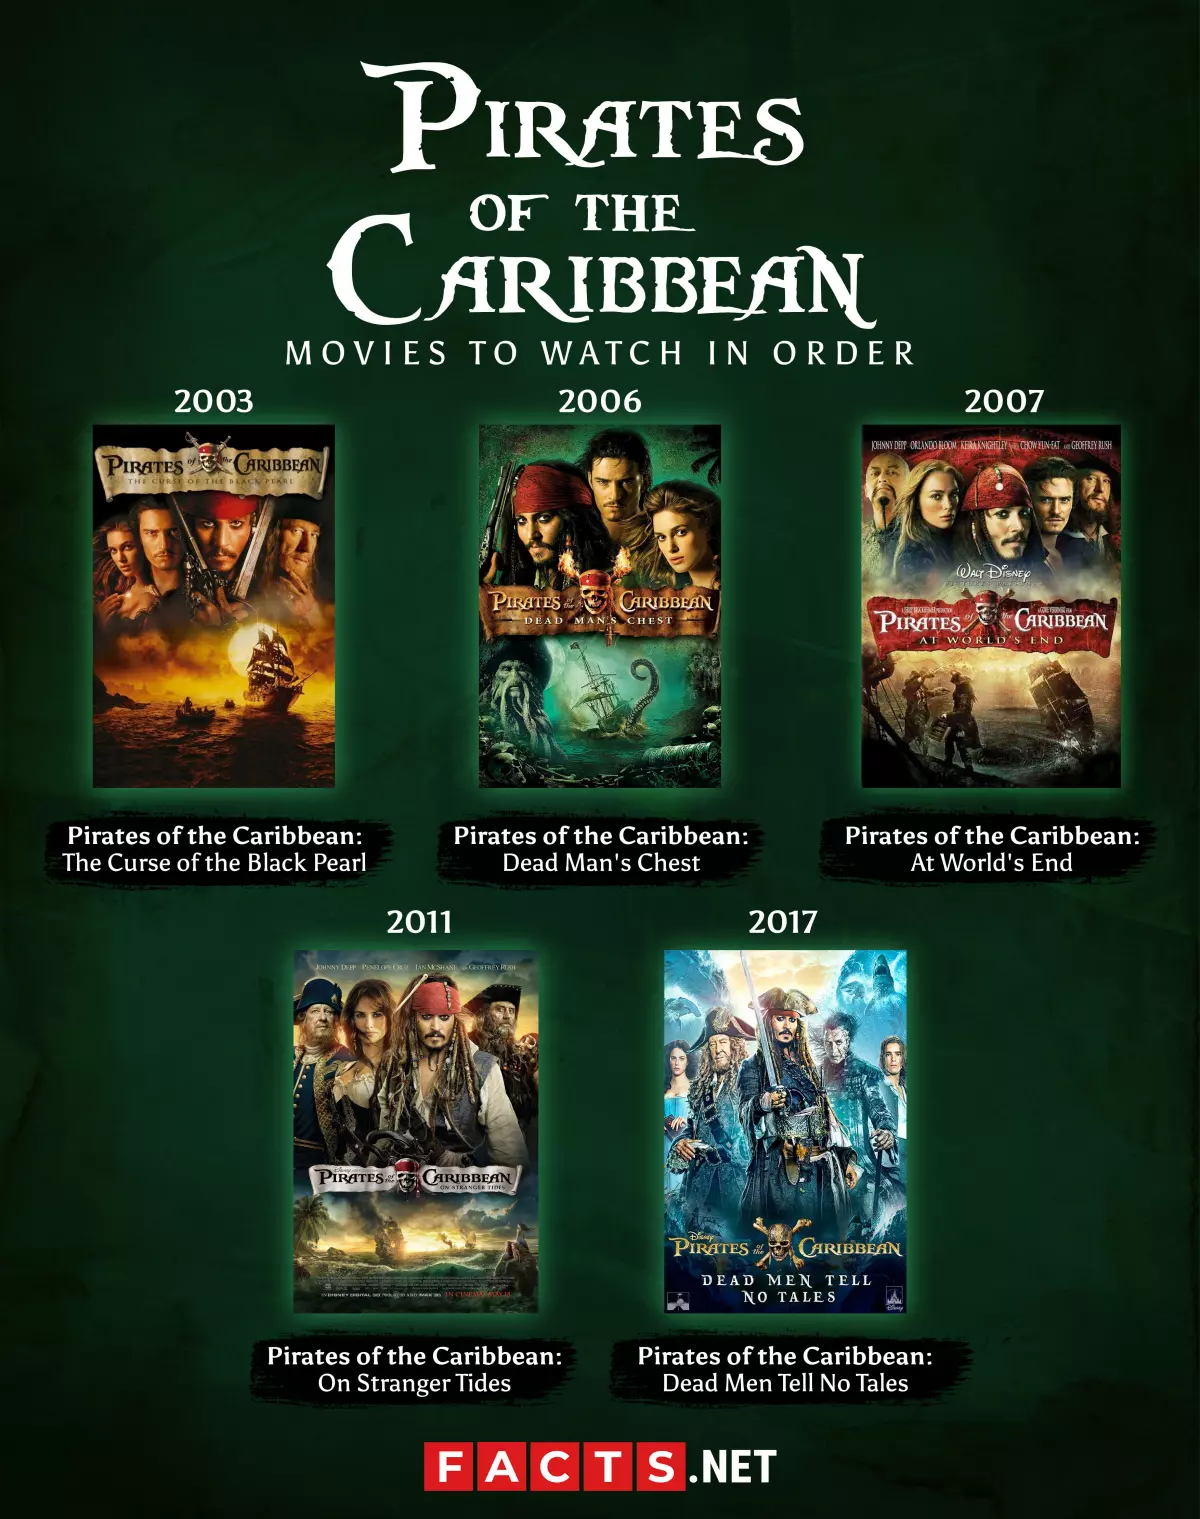 Pirates of the Caribbean Movies to Watch in Order